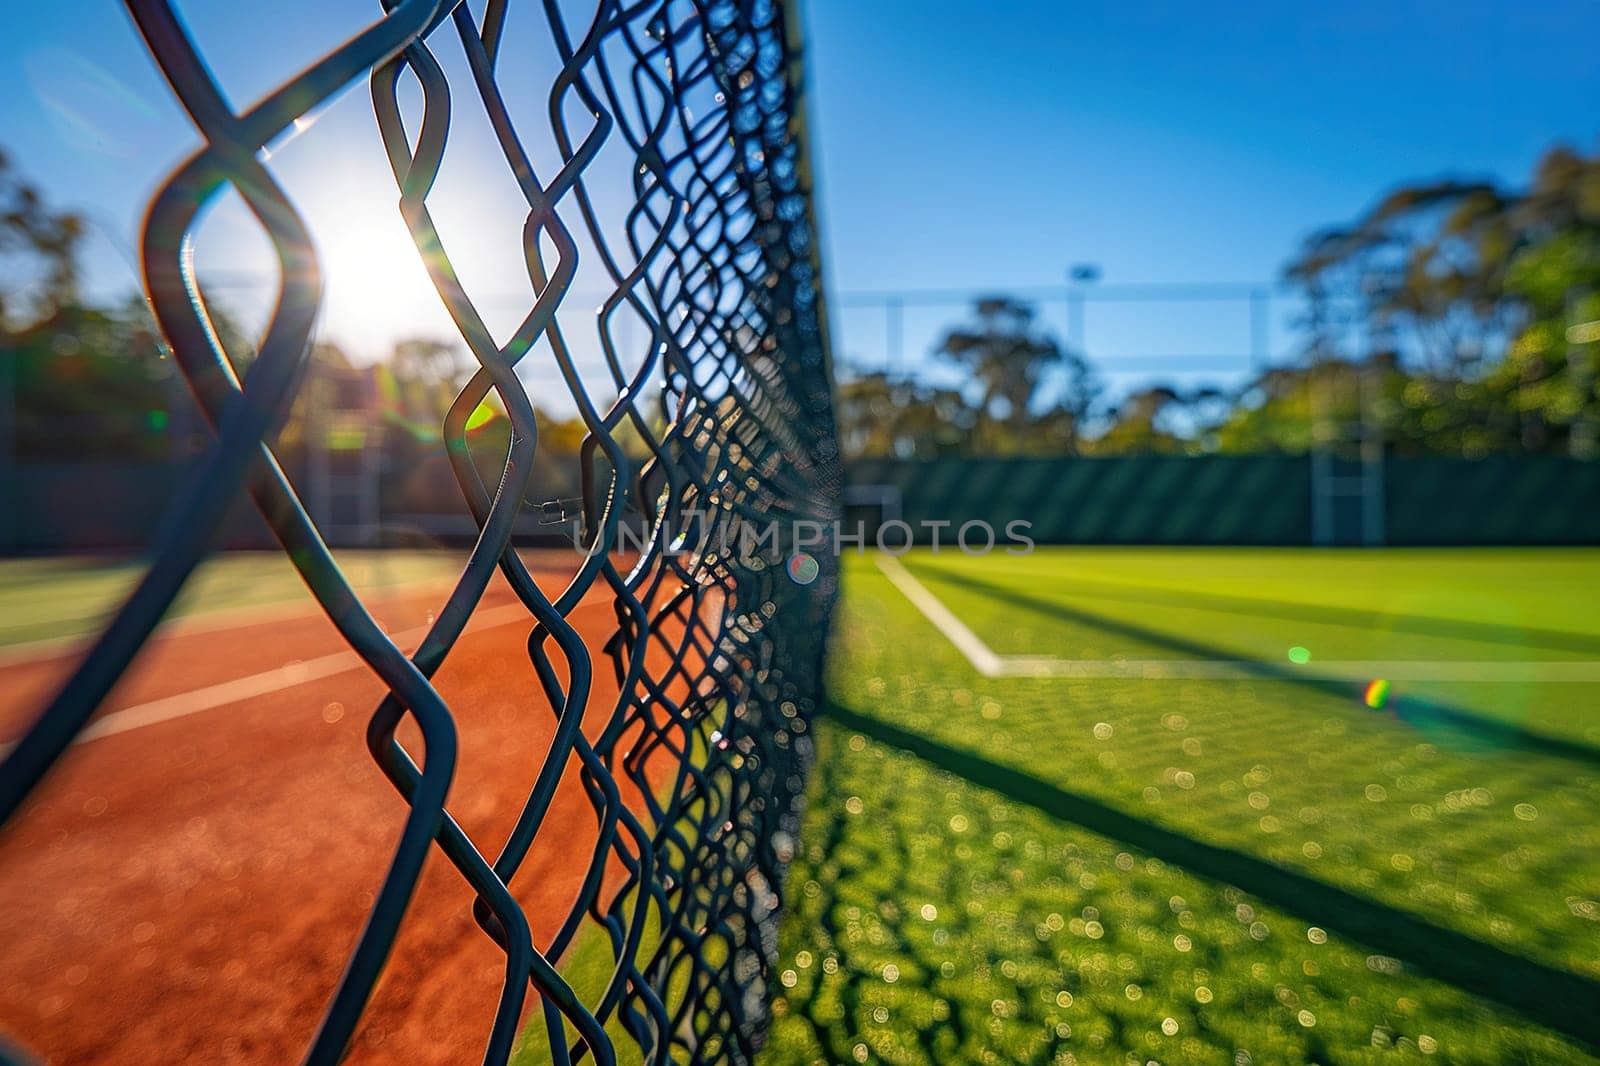 Close-up of a metal mesh in an outdoor sports stadium on a sunny day.